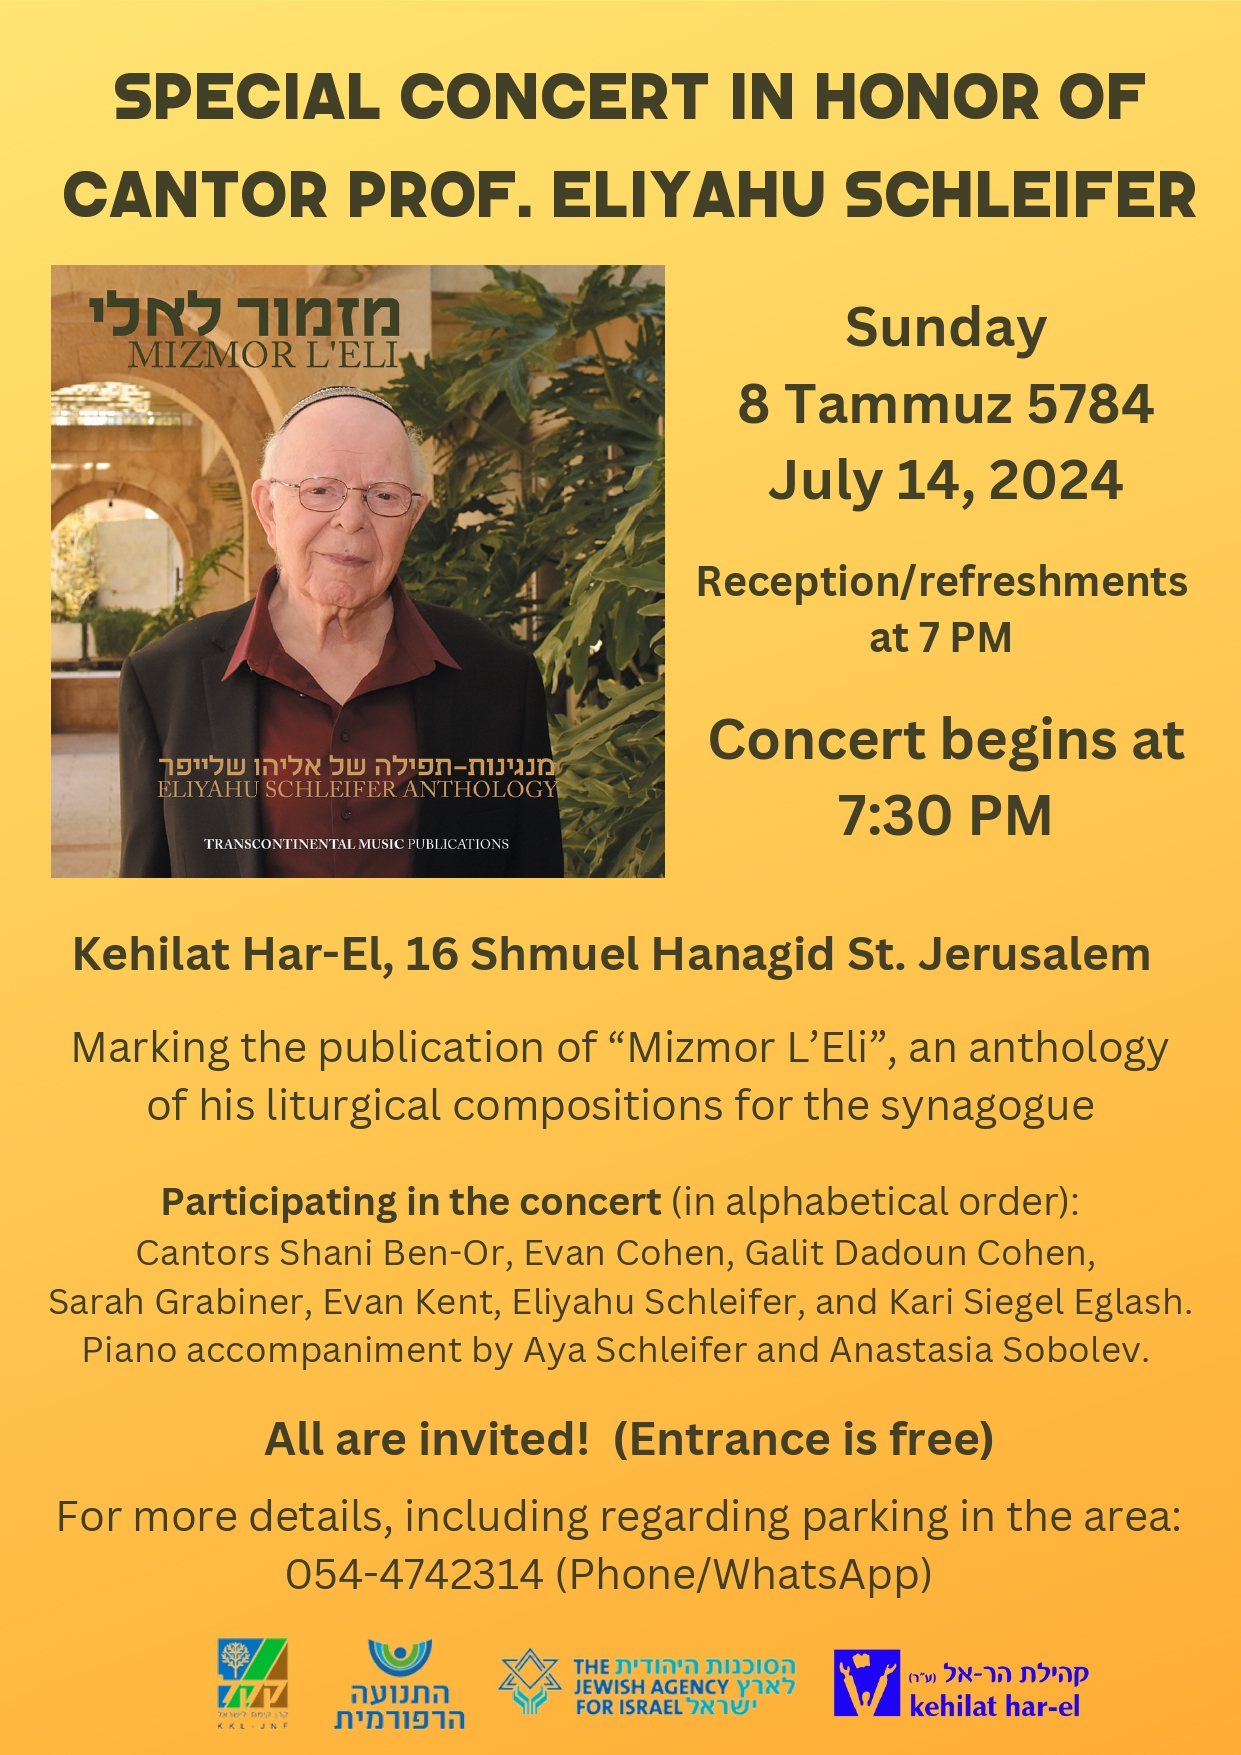 Invitation to a special concert in honor of cantor Prof. Eliyahu Schleifer